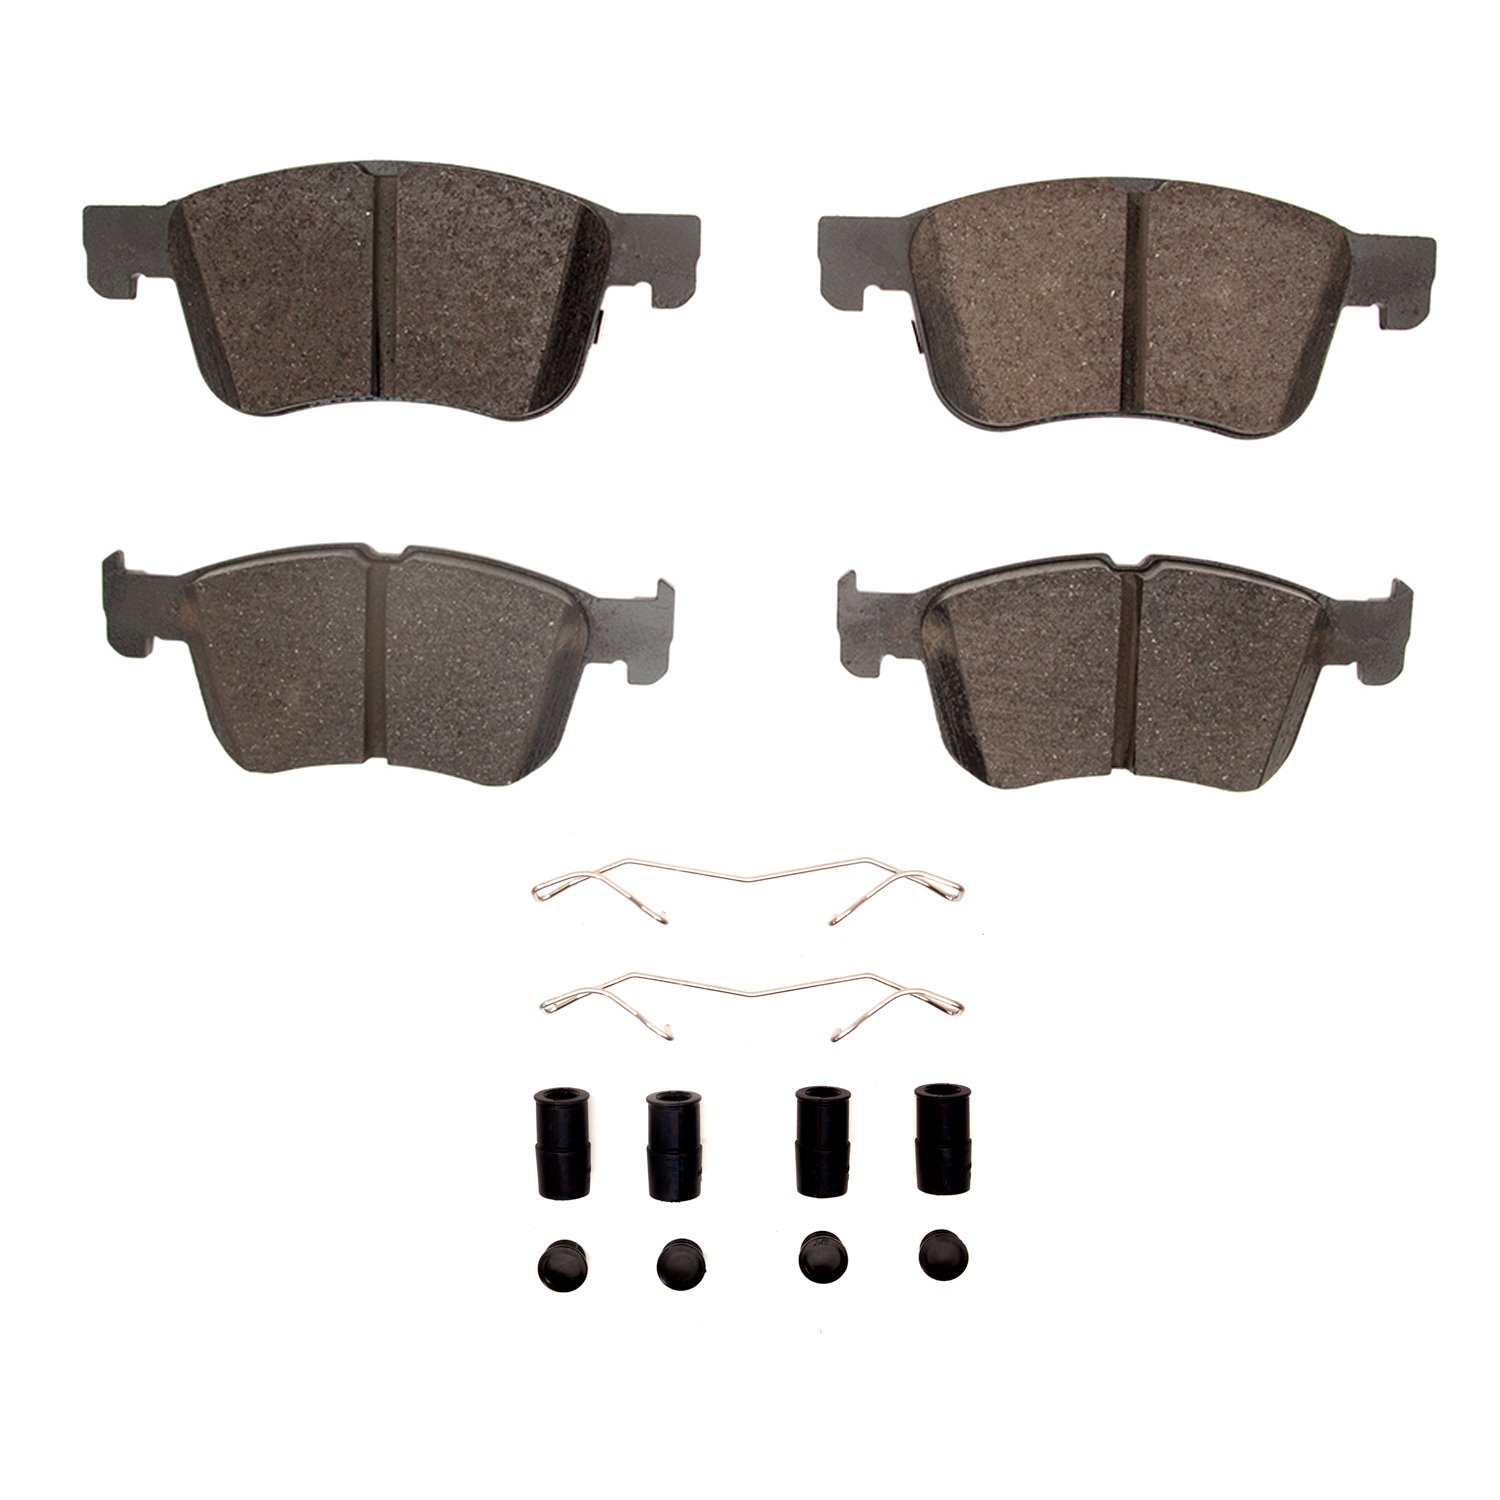 1310-2300-01 3000-Series Ceramic Brake Pads & Hardware Kit, Fits Select Ford/Lincoln/Mercury/Mazda, Position: Front